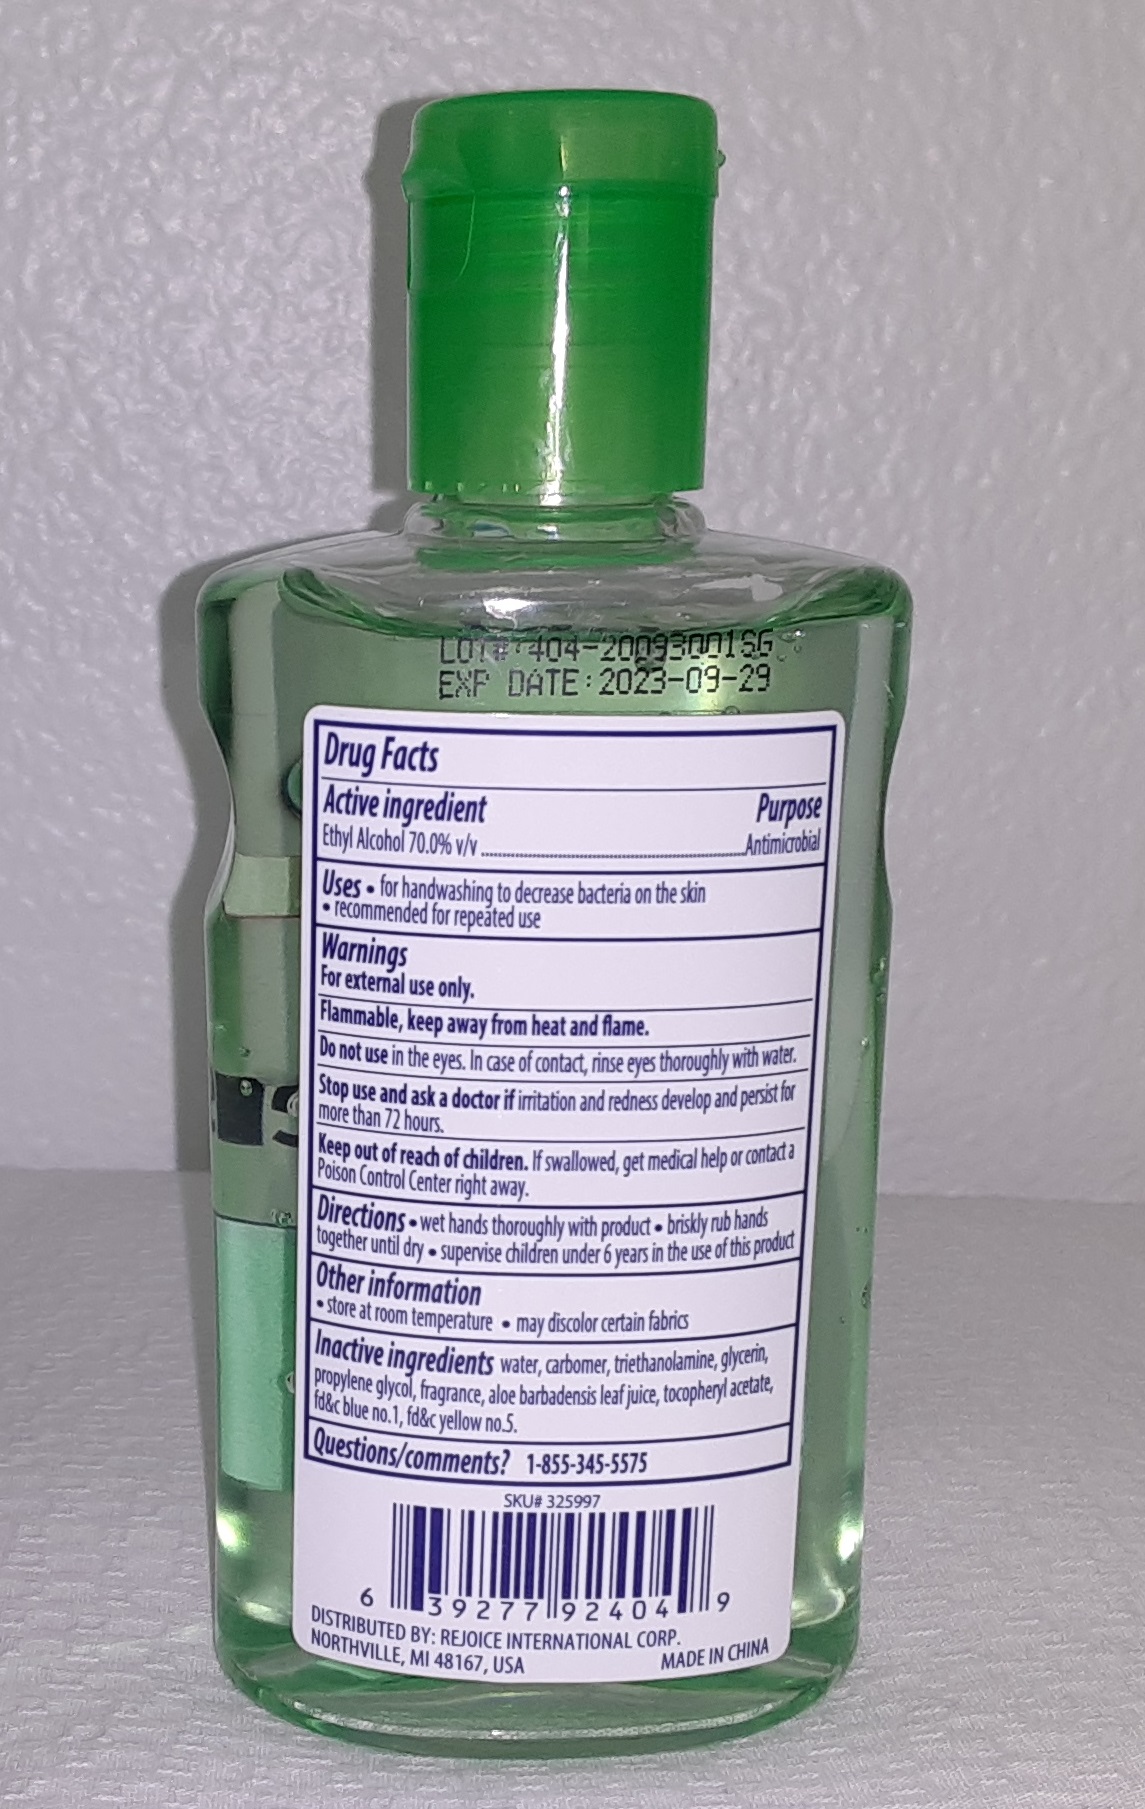 XtraCare Hand Sanitizer Gel 8fl oz - 70% Alcohol - Antibacterial - Moisturizes with Vitamin E and Aloe